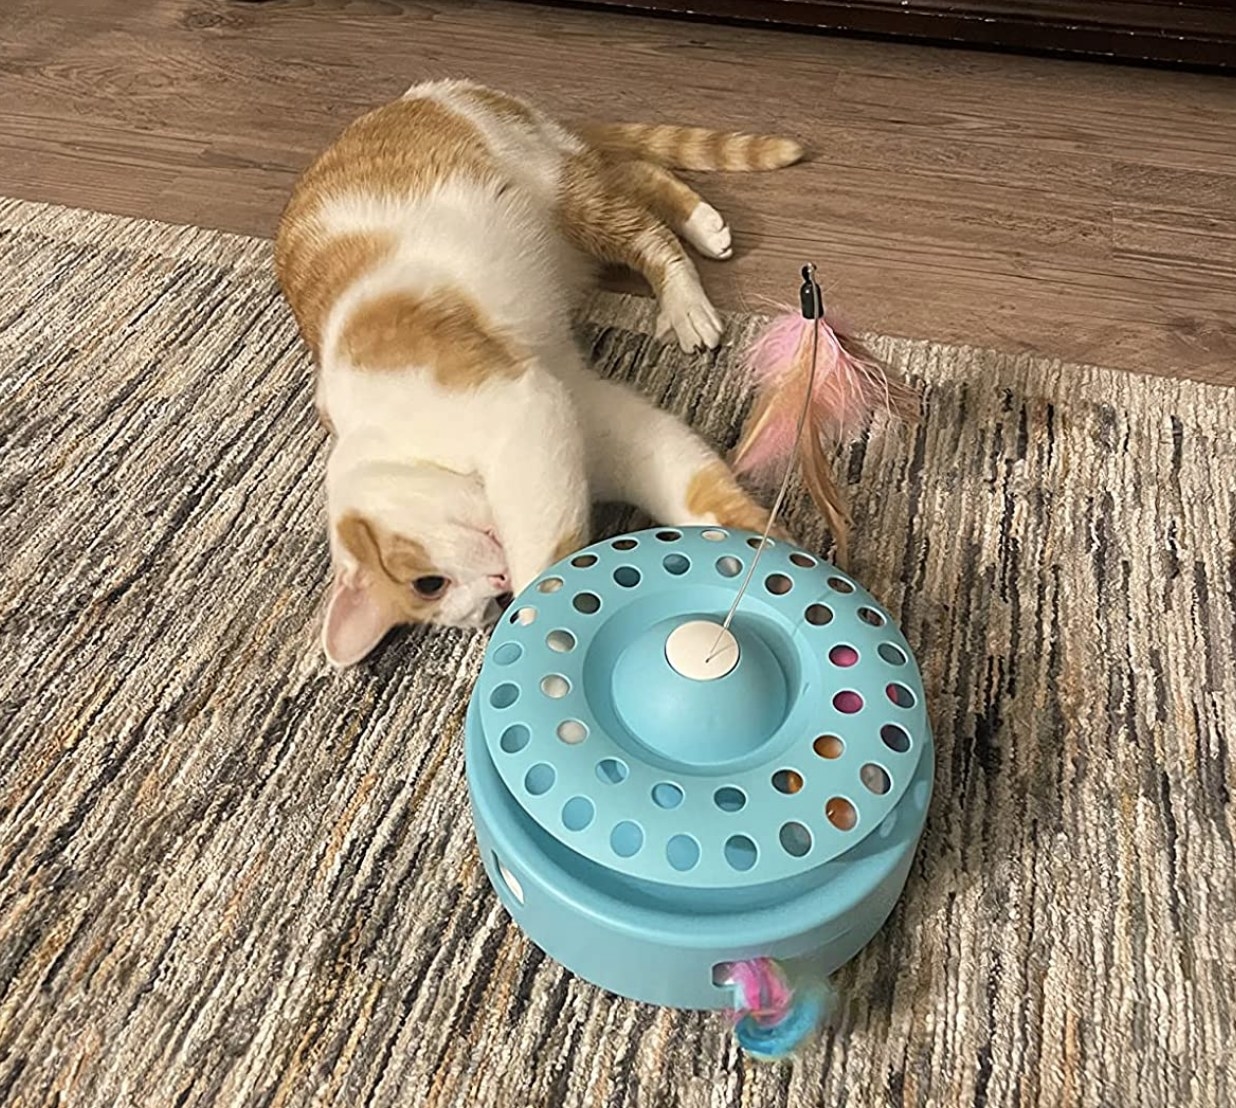 reviewer photo showing their cat playing with the 3-in-1 toy